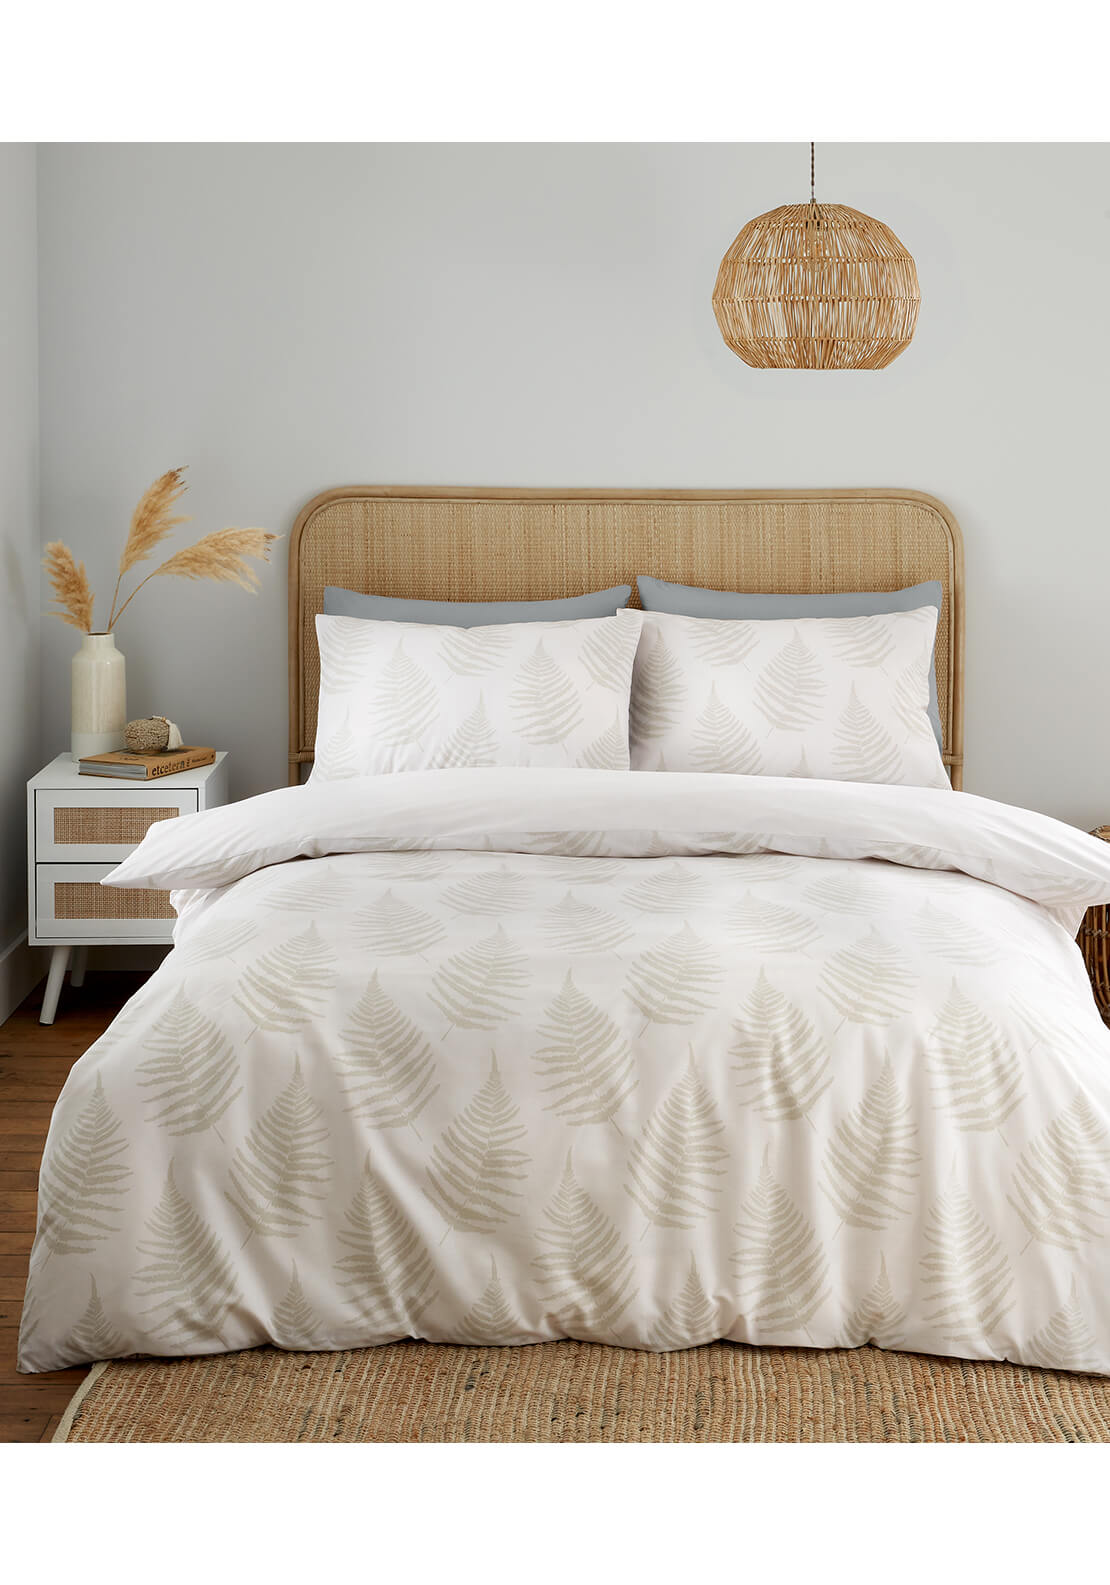  The Home Collection Botanical Fern Floral Reversible Duvet Cover Set - Natural 2 Shaws Department Stores